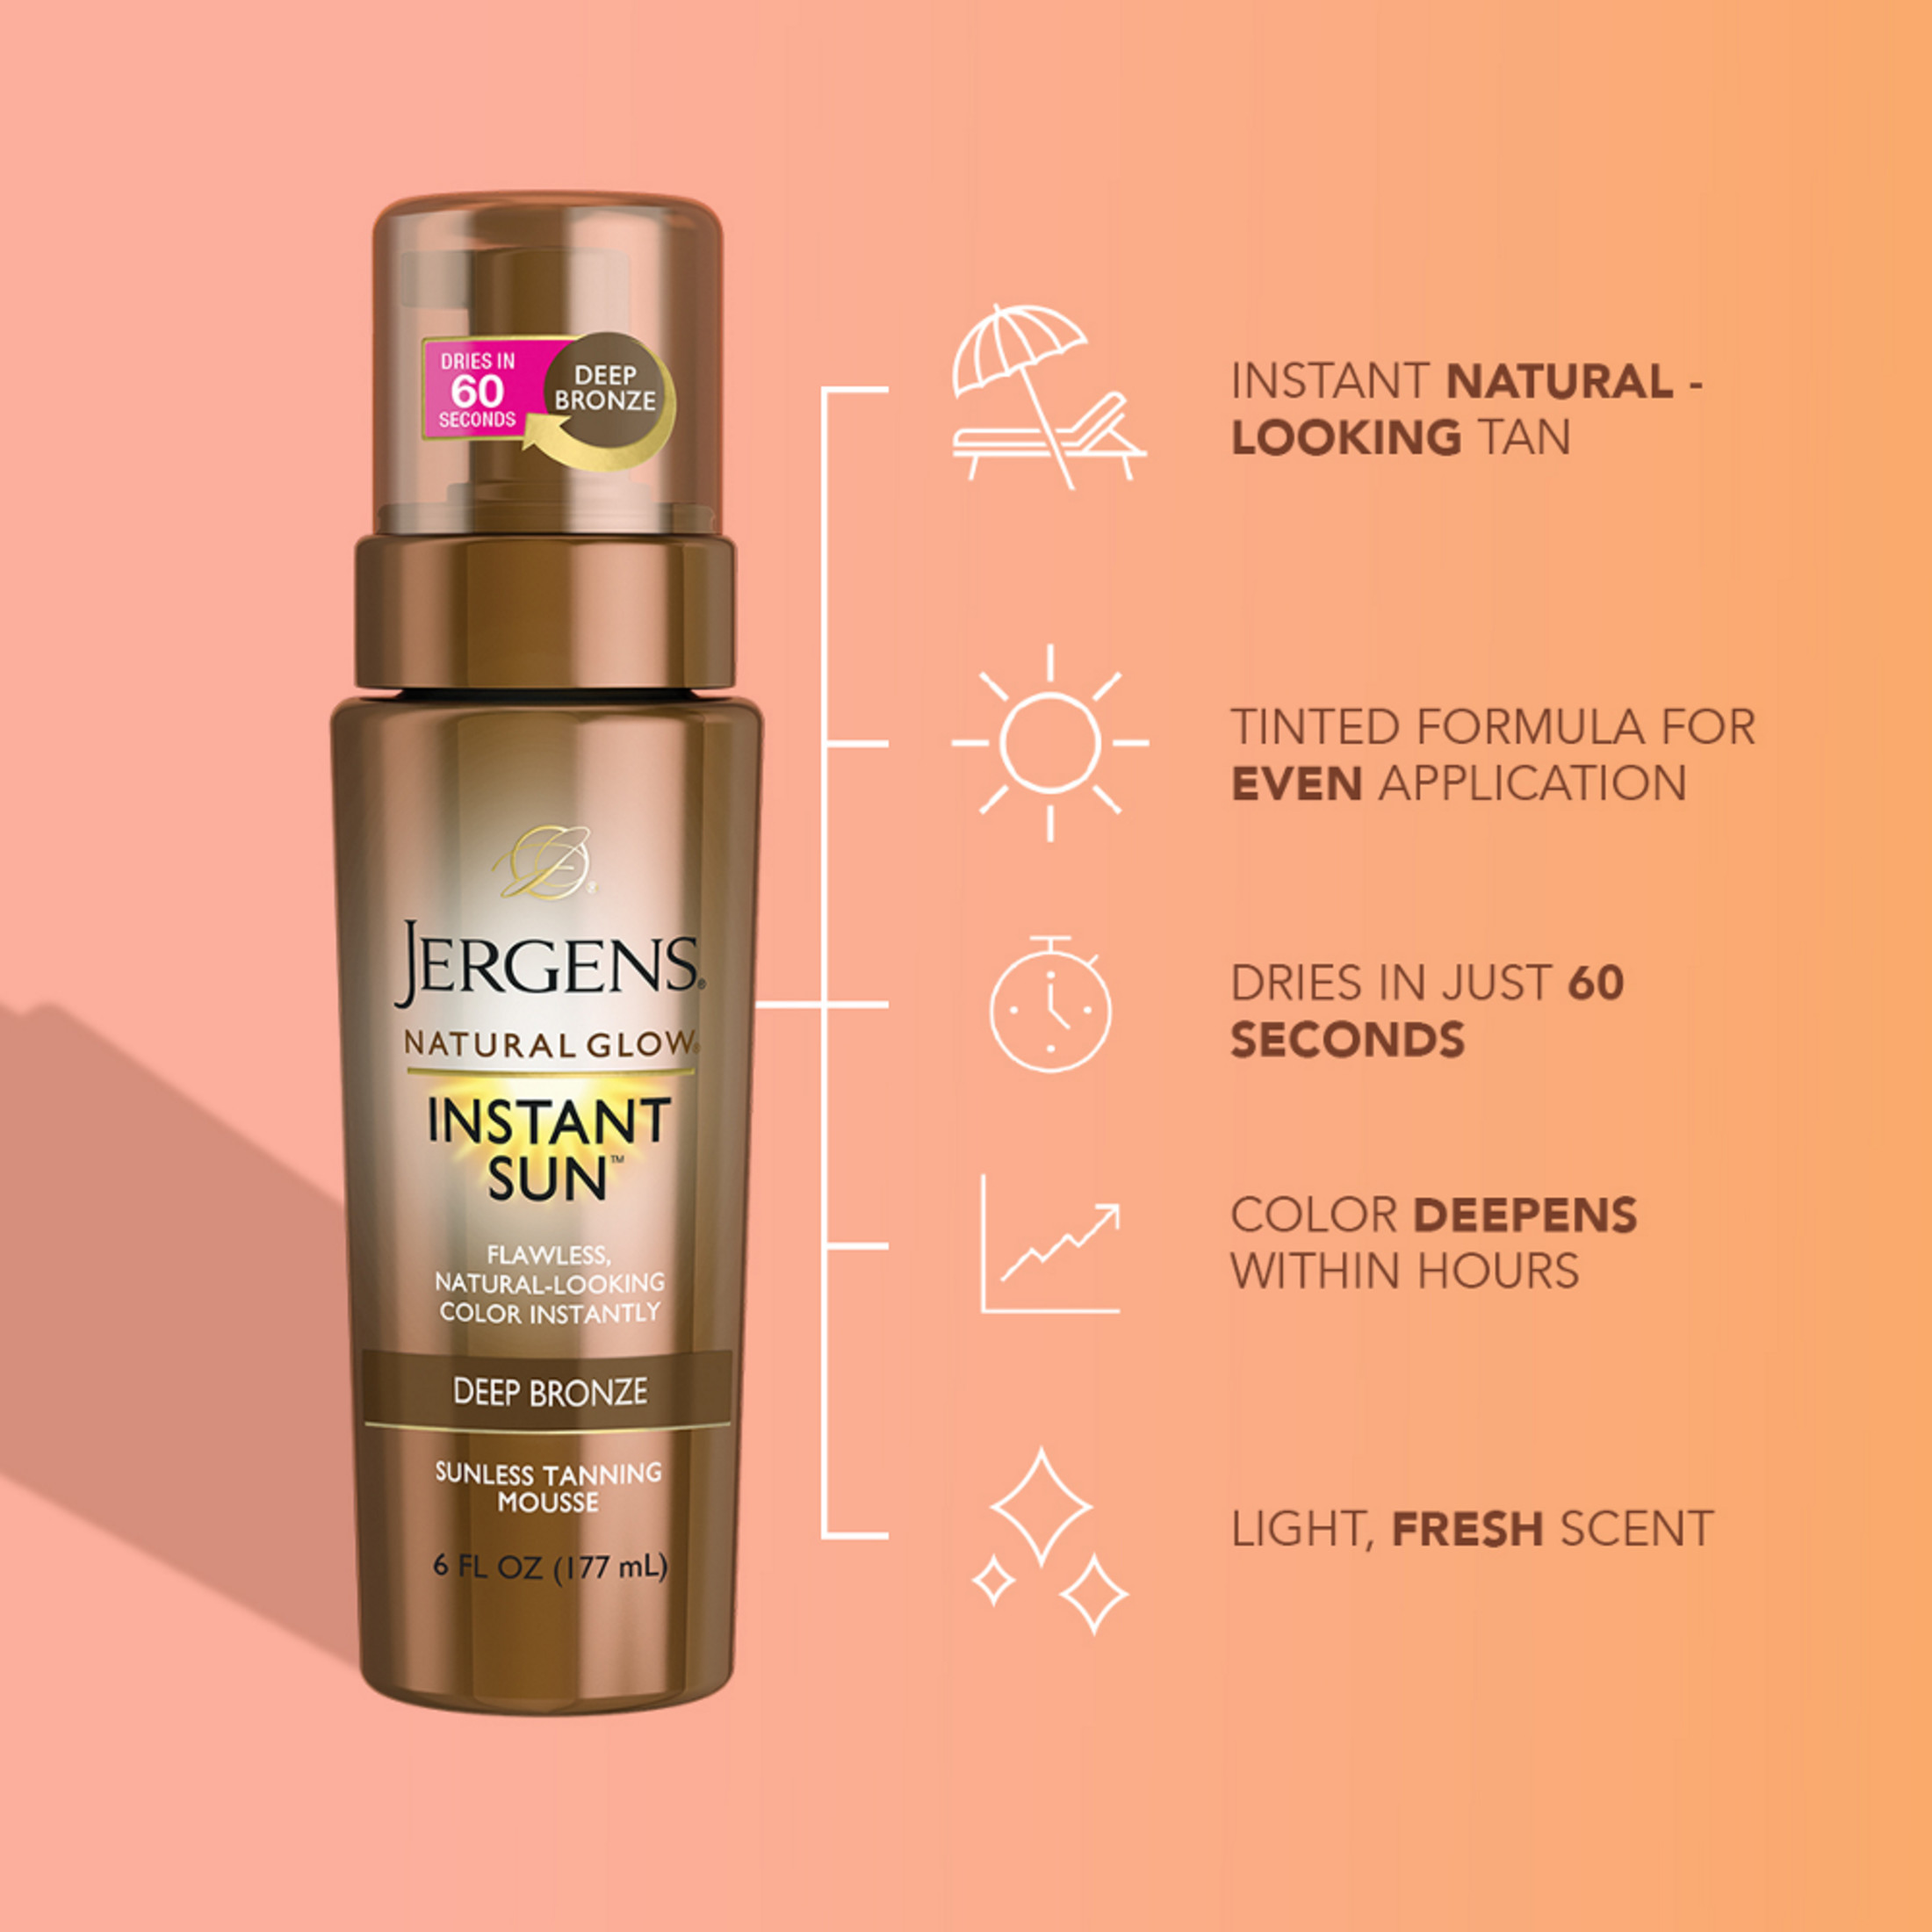 Jergens Natural Glow Instant Sun Sunless Tanning Mousse, Deep Bronze, 6 fl oz - image 3 of 10